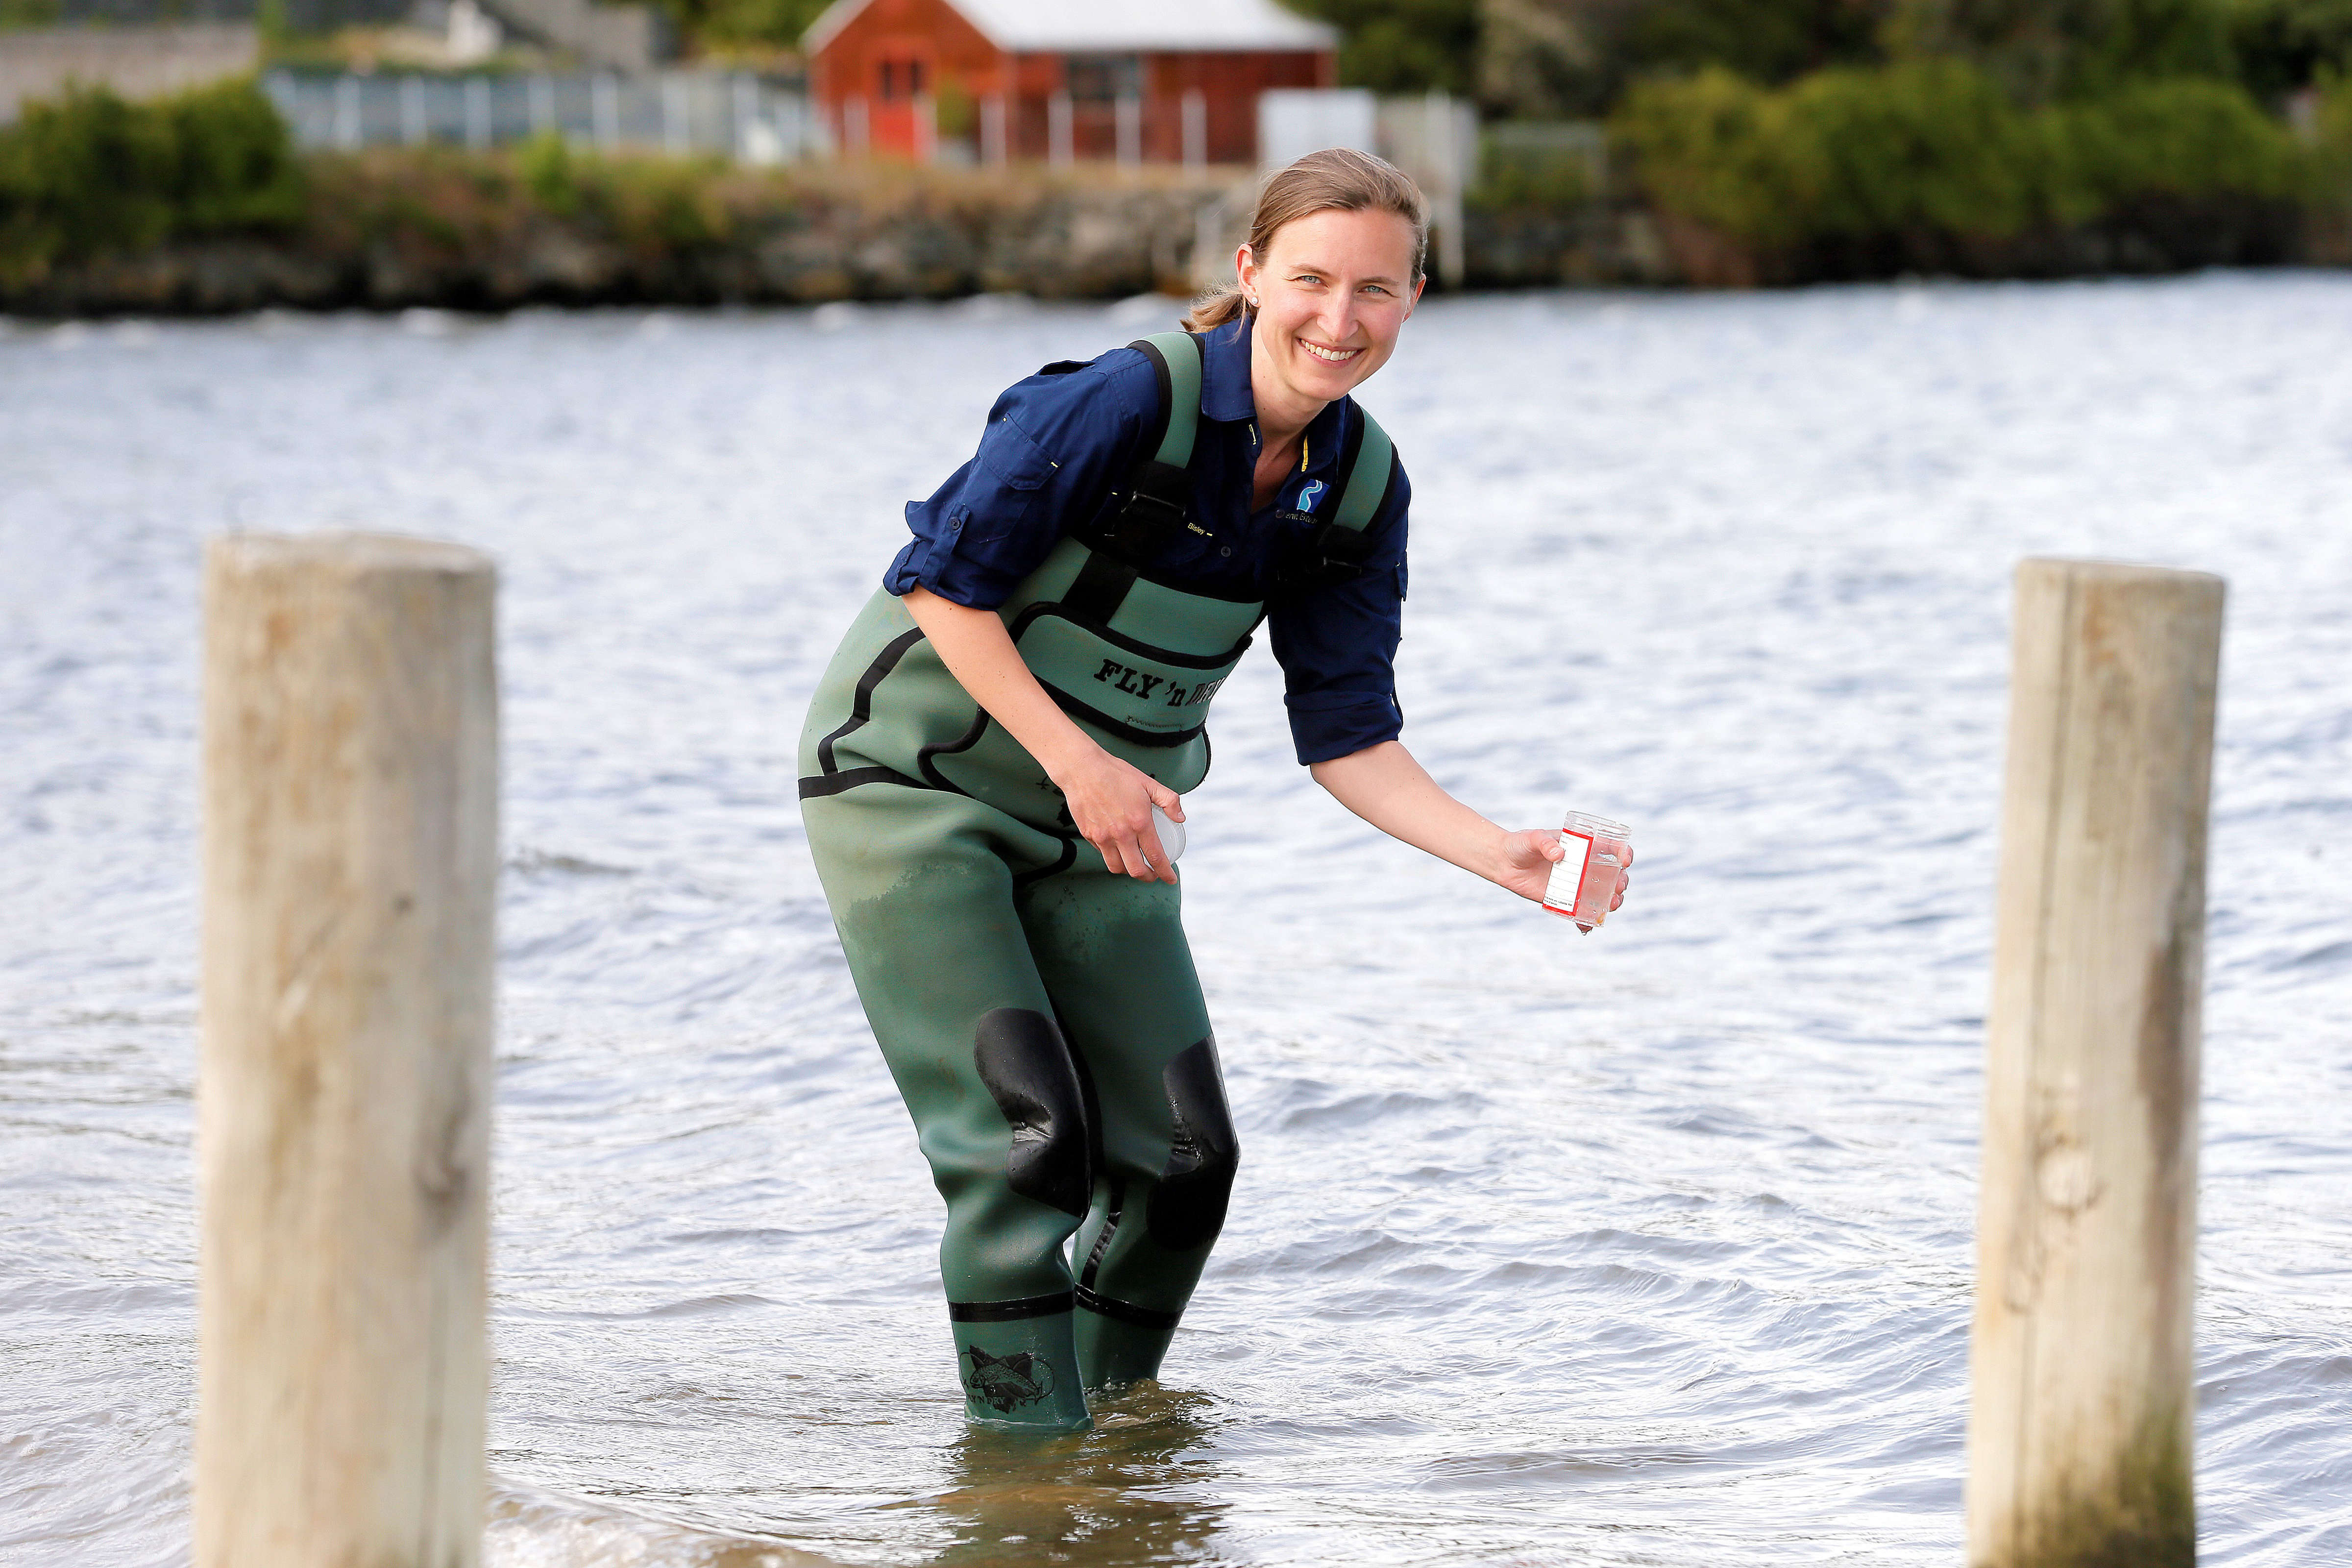 Bernadette Proemse in waders collecting a water sample in Sandy Bay (Marieville Esplanade). Photo: M. Thompson.